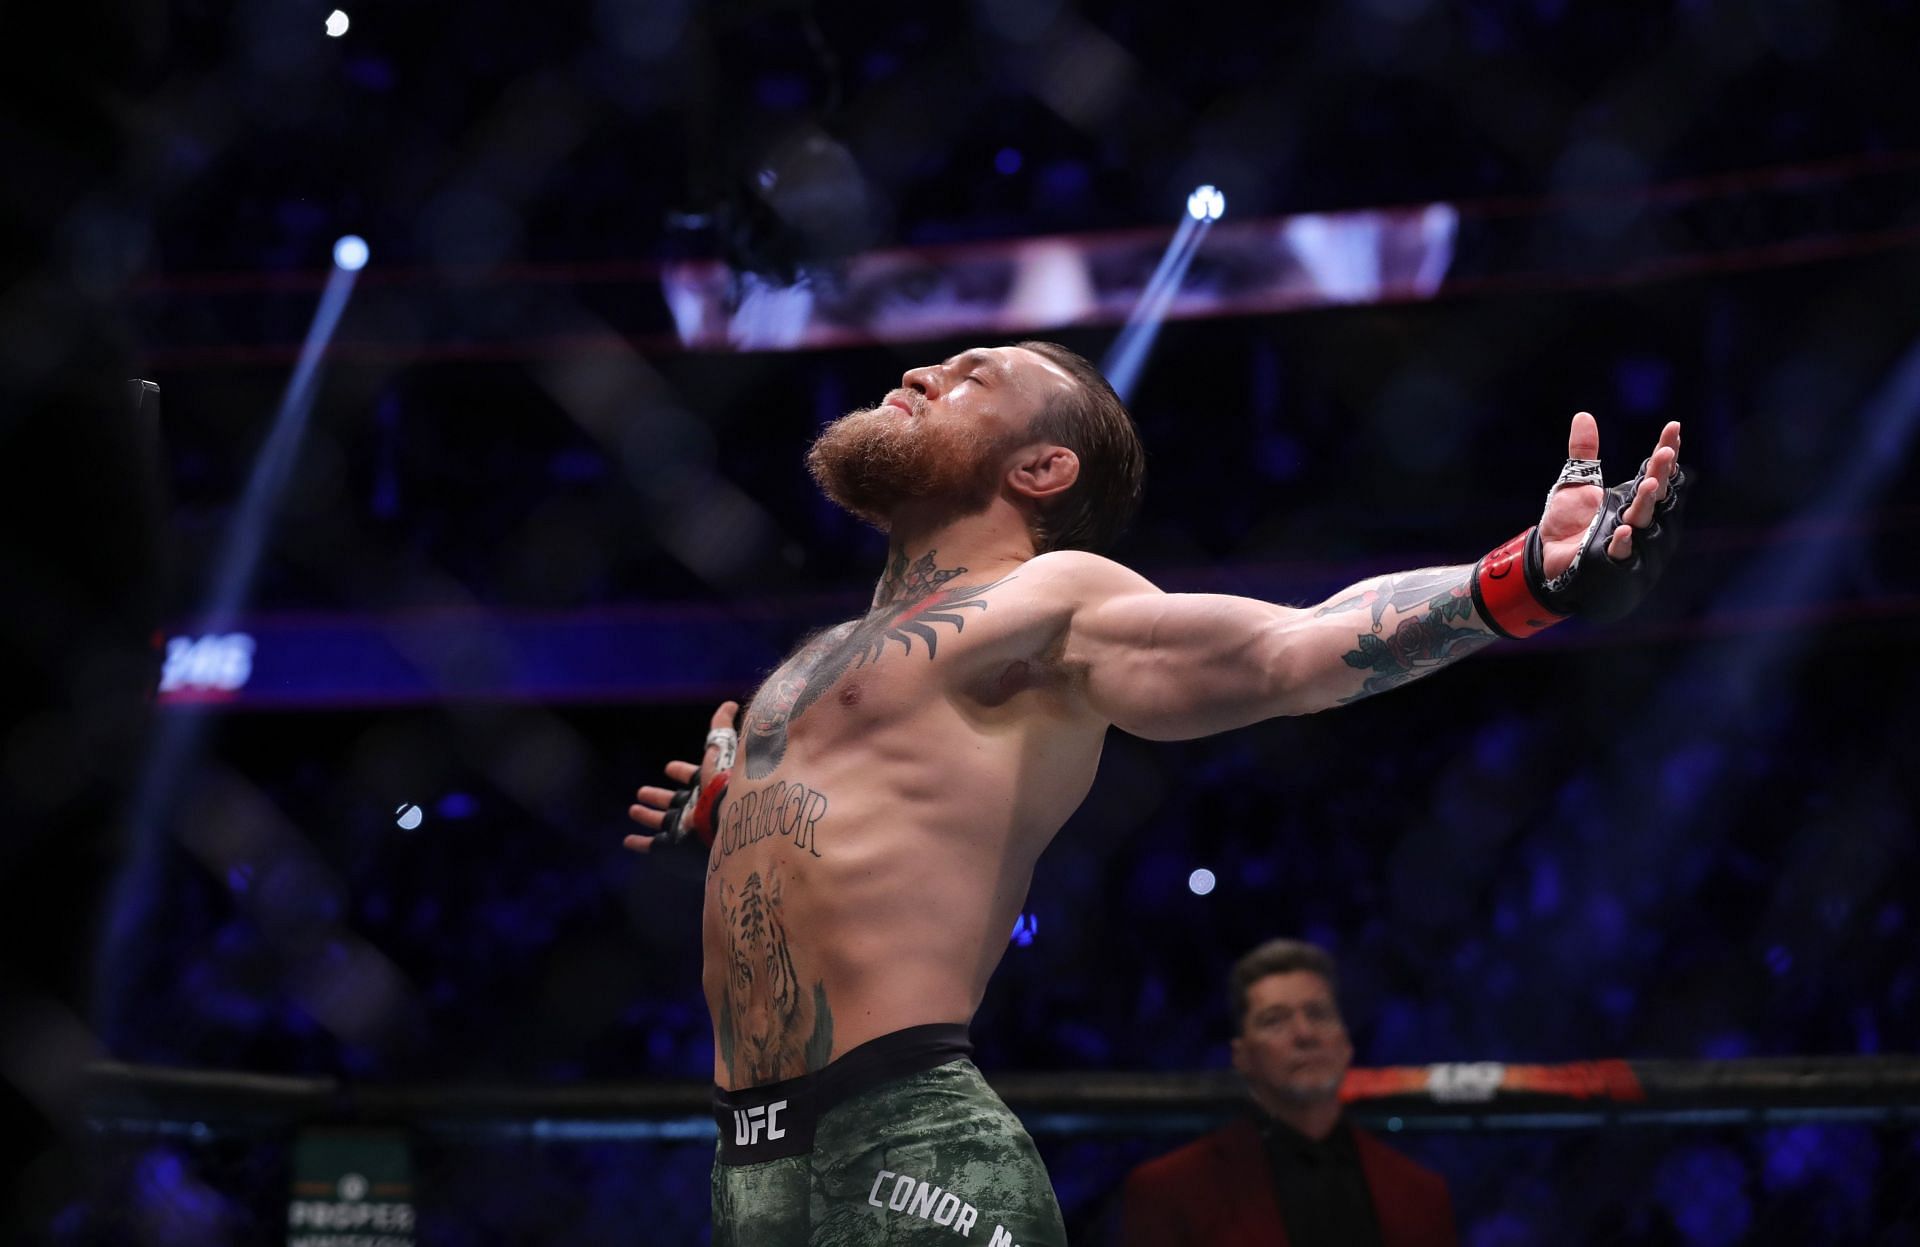 Conor McGregor is in dire need of a win in his next fight